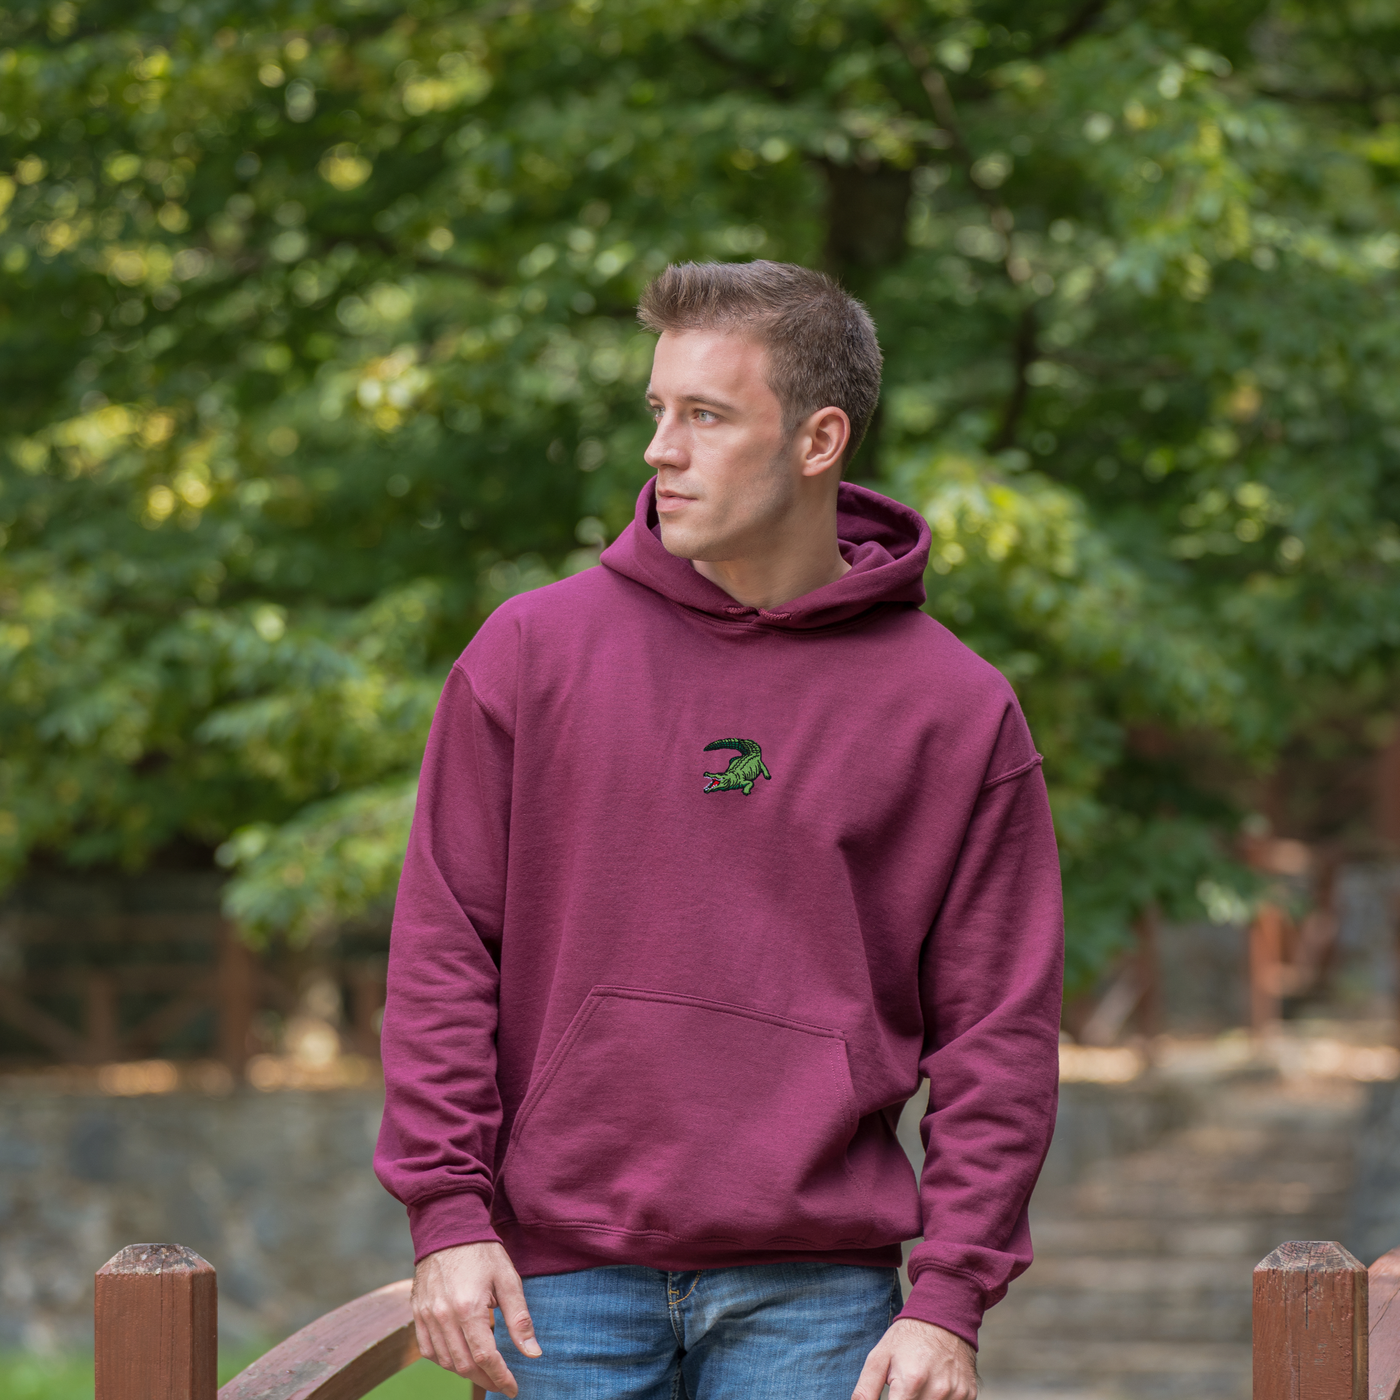 Bobby's Planet Men's Embroidered Saltwater Crocodile Hoodie from Australia Down Under Animals Collection in Maroon Color#color_maroon